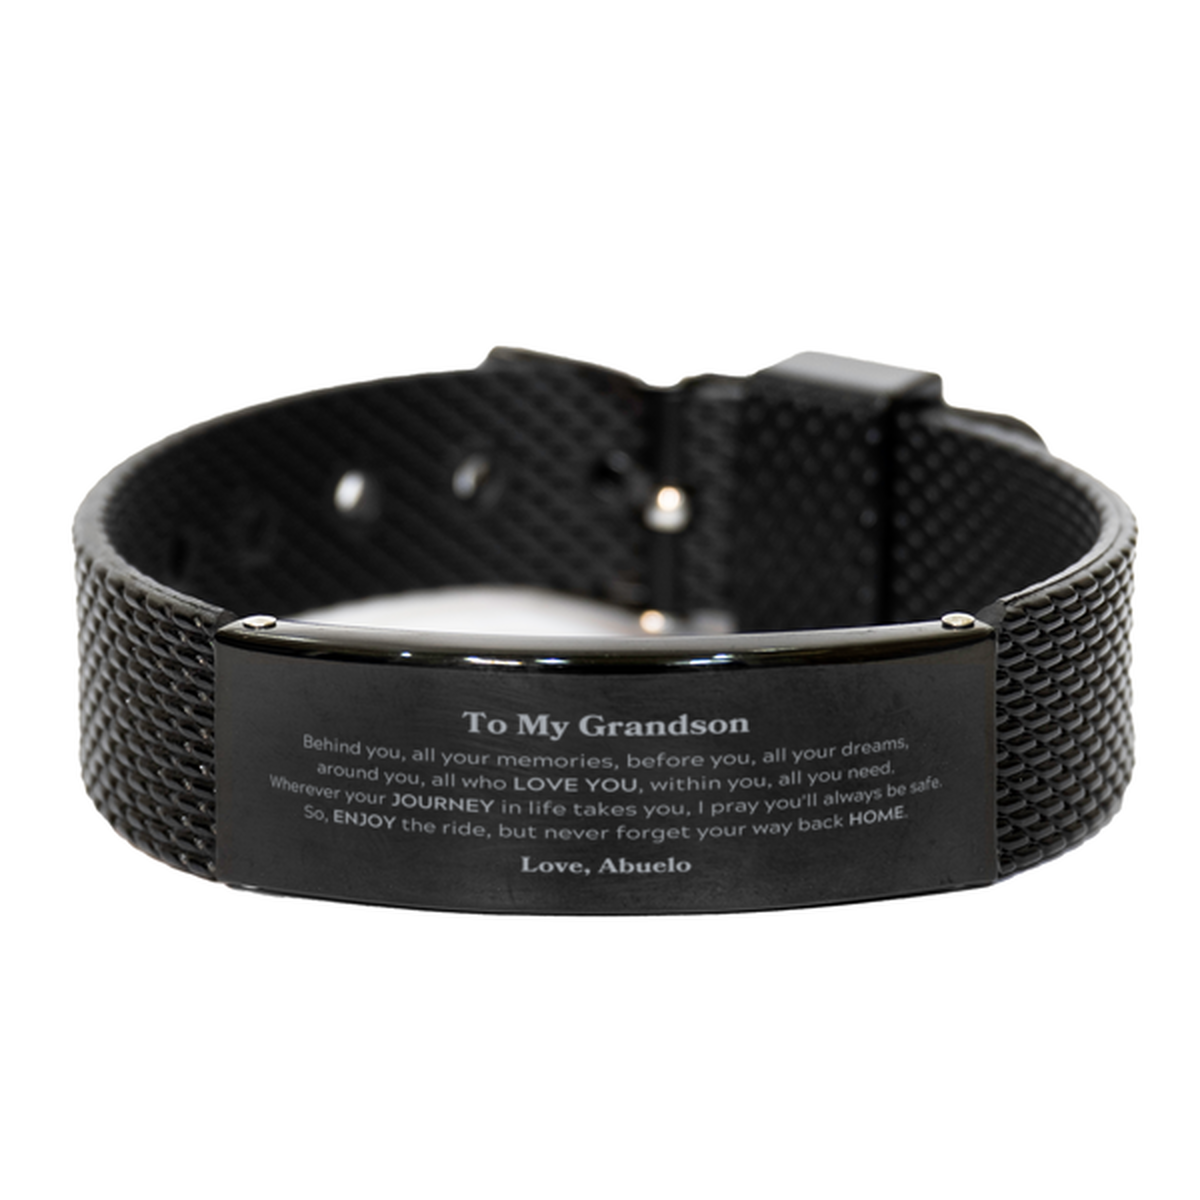 To My Grandson Graduation Gifts from Abuelo, Grandson Black Shark Mesh Bracelet Christmas Birthday Gifts for Grandson Behind you, all your memories, before you, all your dreams. Love, Abuelo